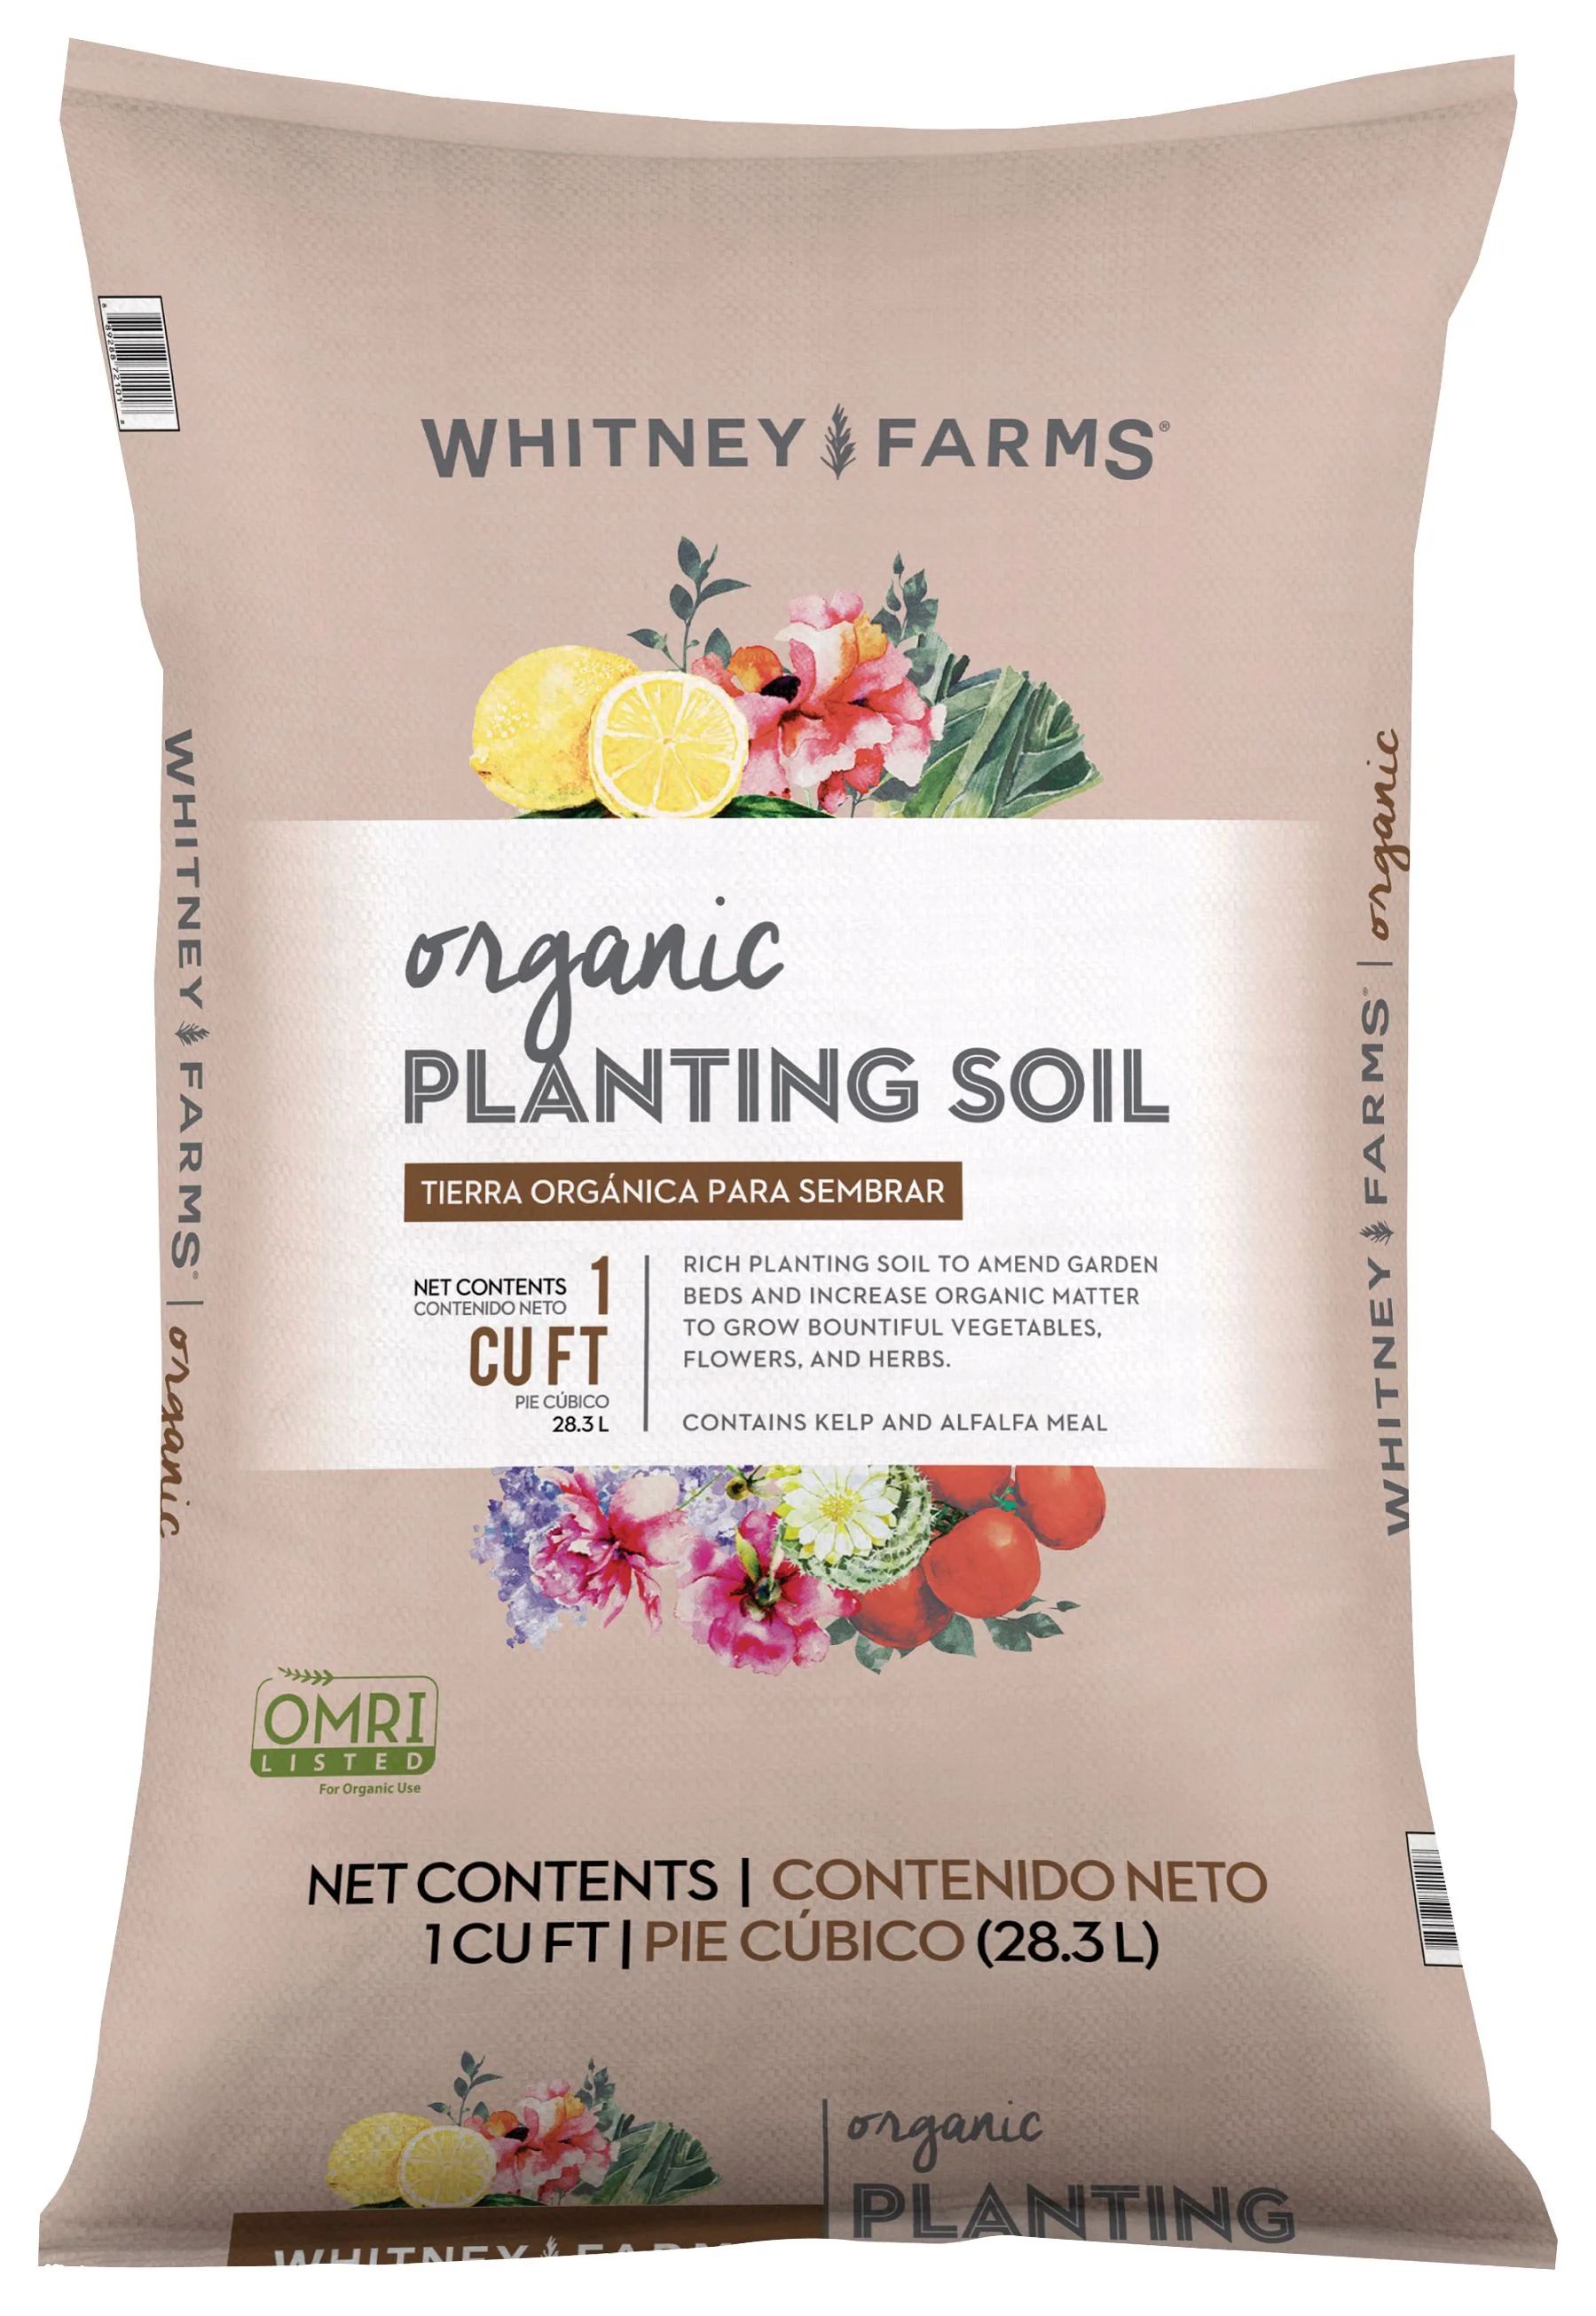 Whitney Farms Organic Planting Soil, Premium Blend for In-ground Vegetable and Flower Beds, 1 cu.... | Walmart (US)